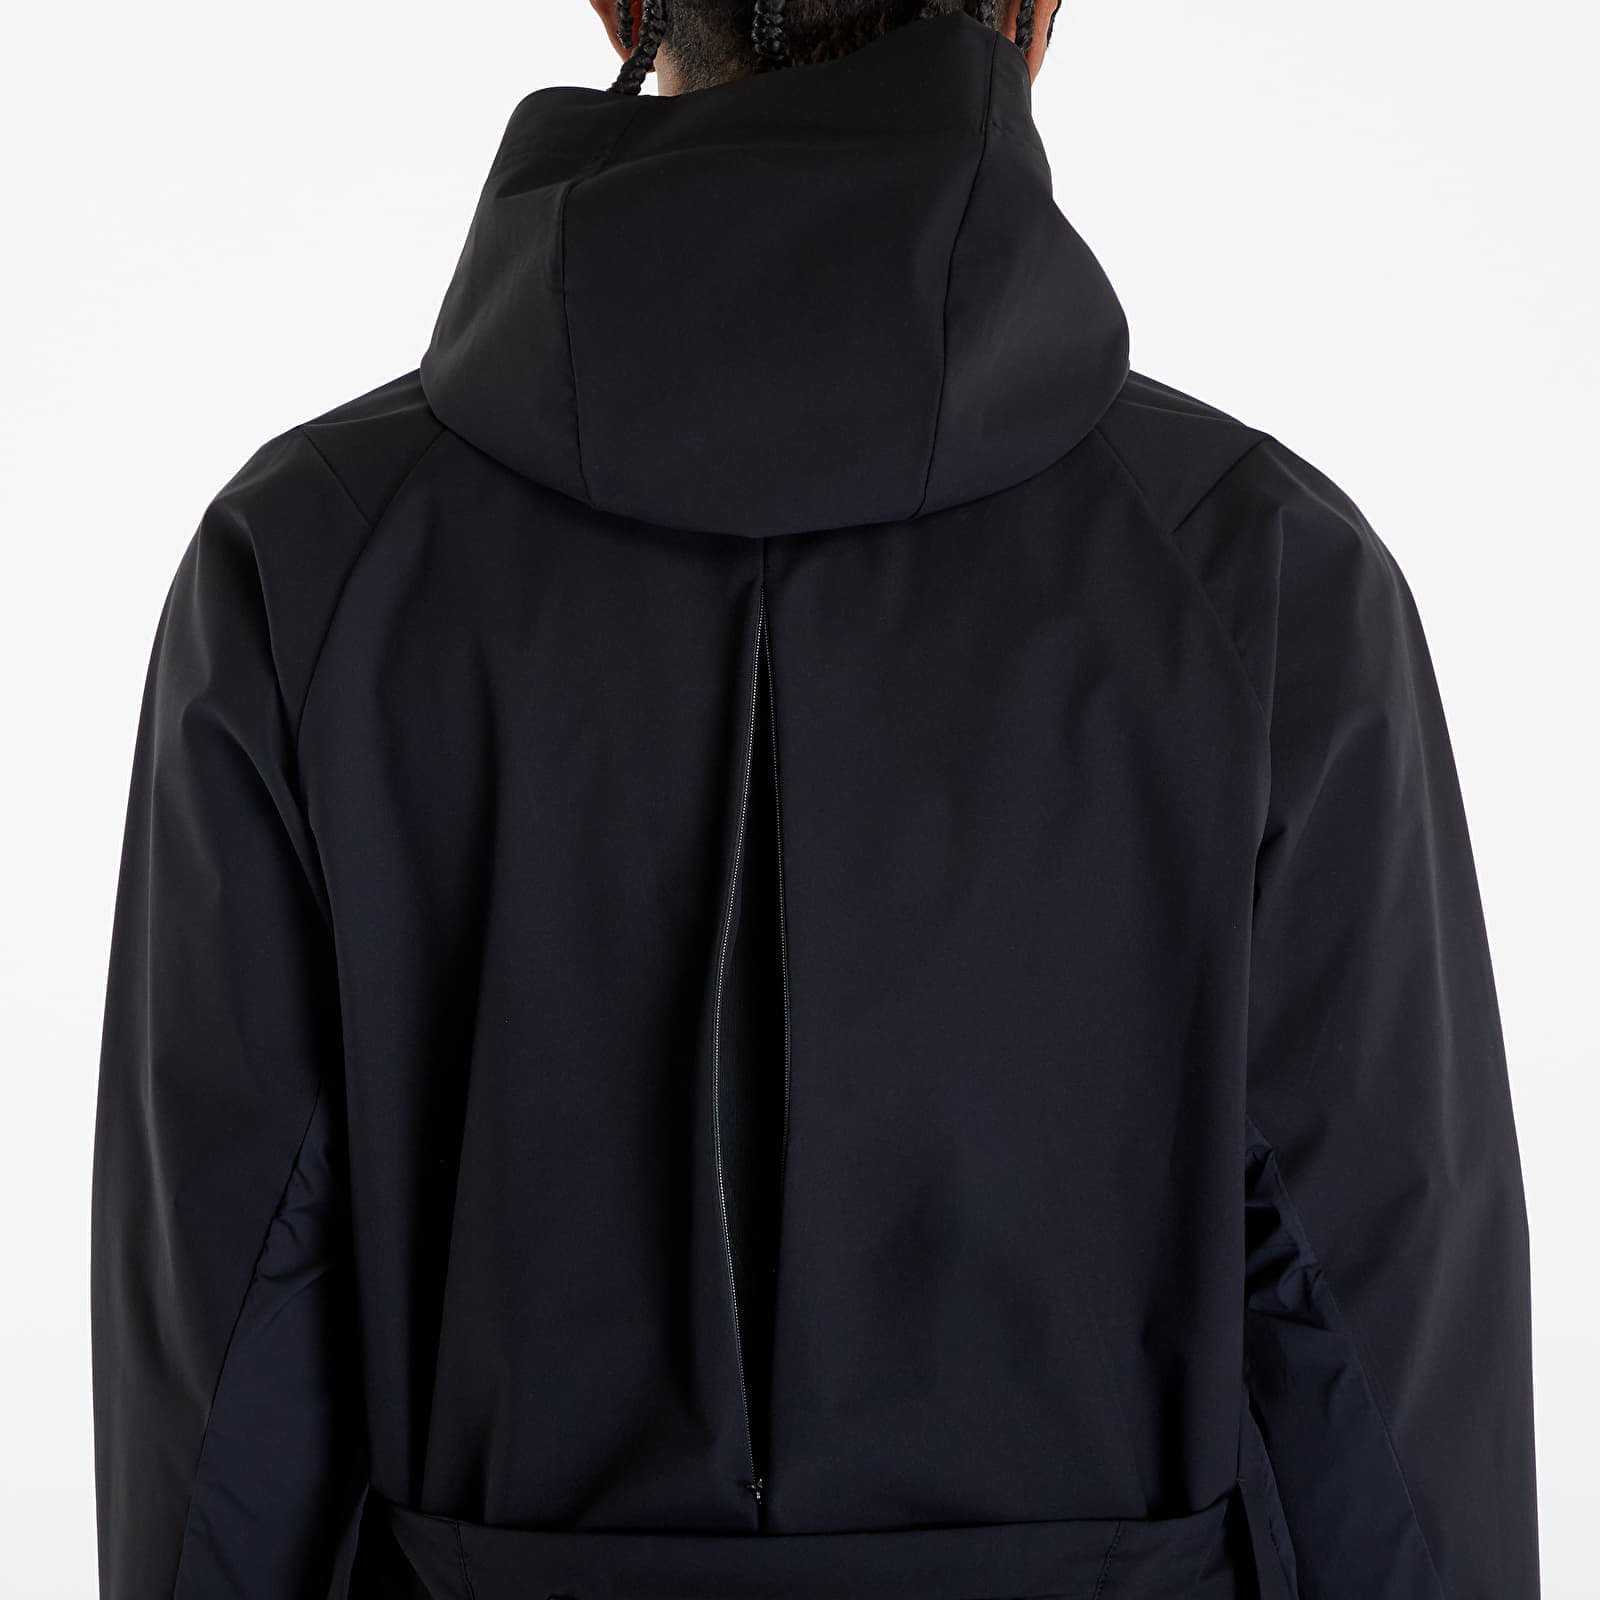 6.0 Technical Jacket Right Black